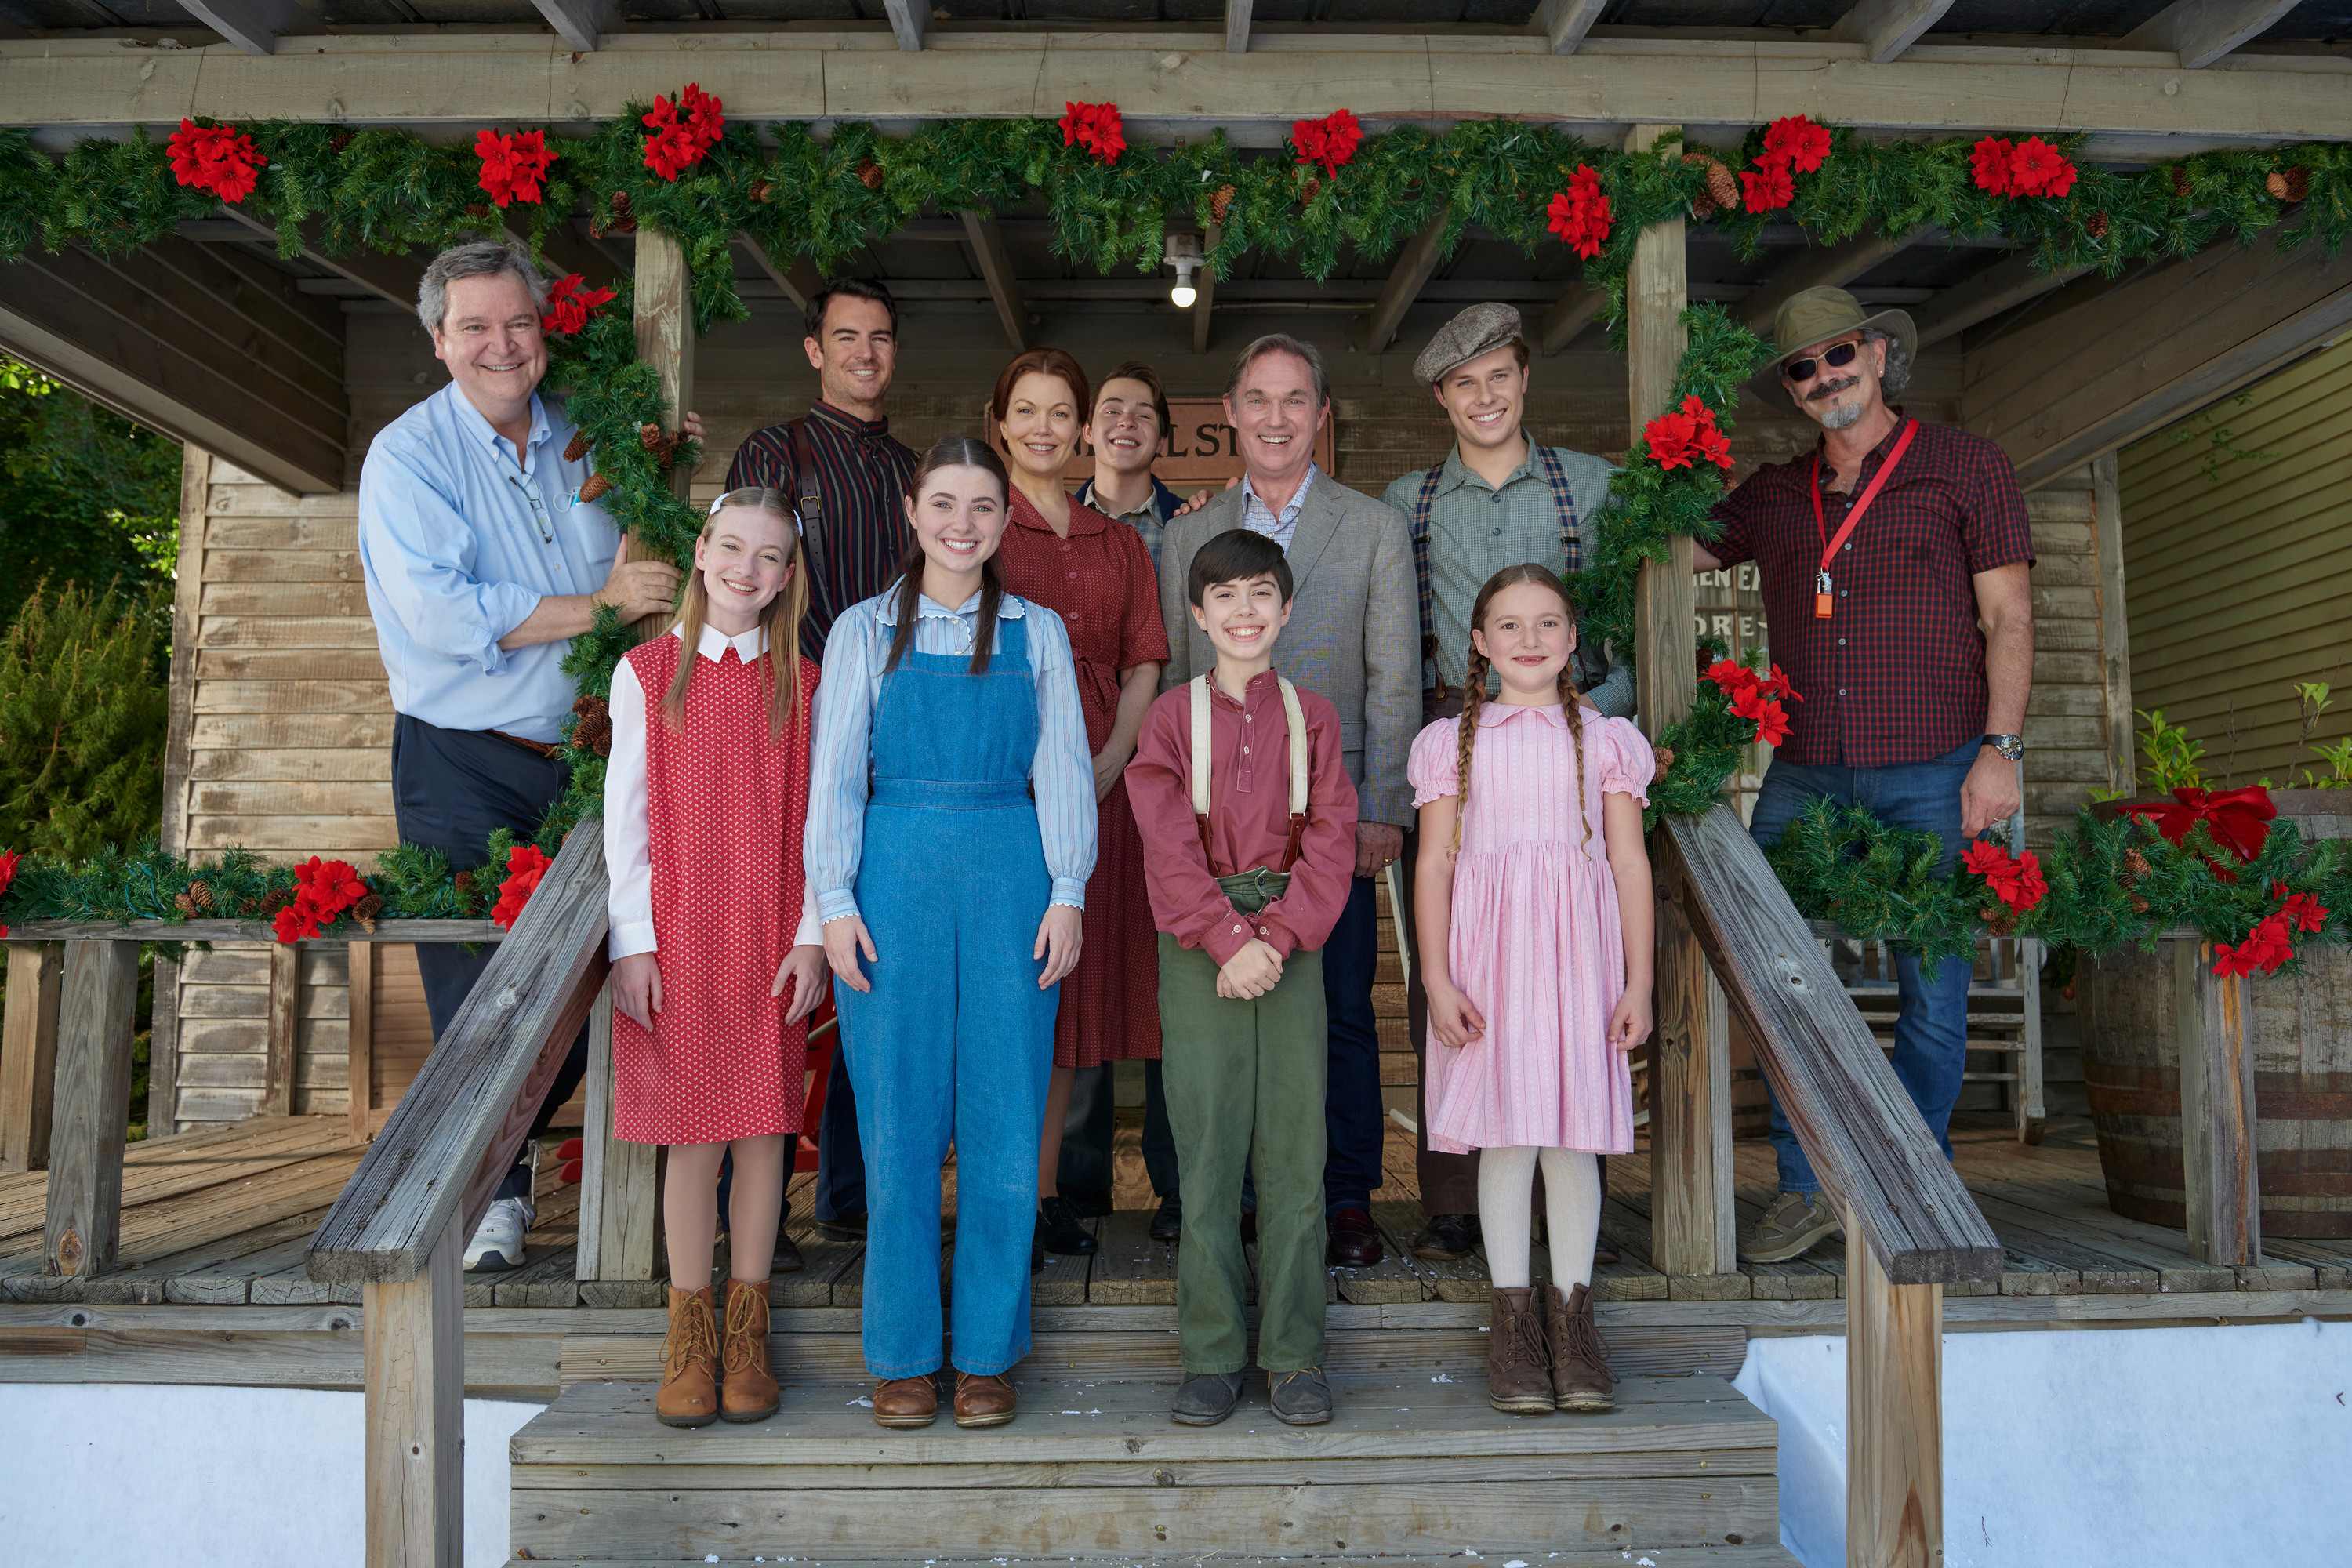 The Waltons: Homecoming' on the CW brings back a 1970s classic